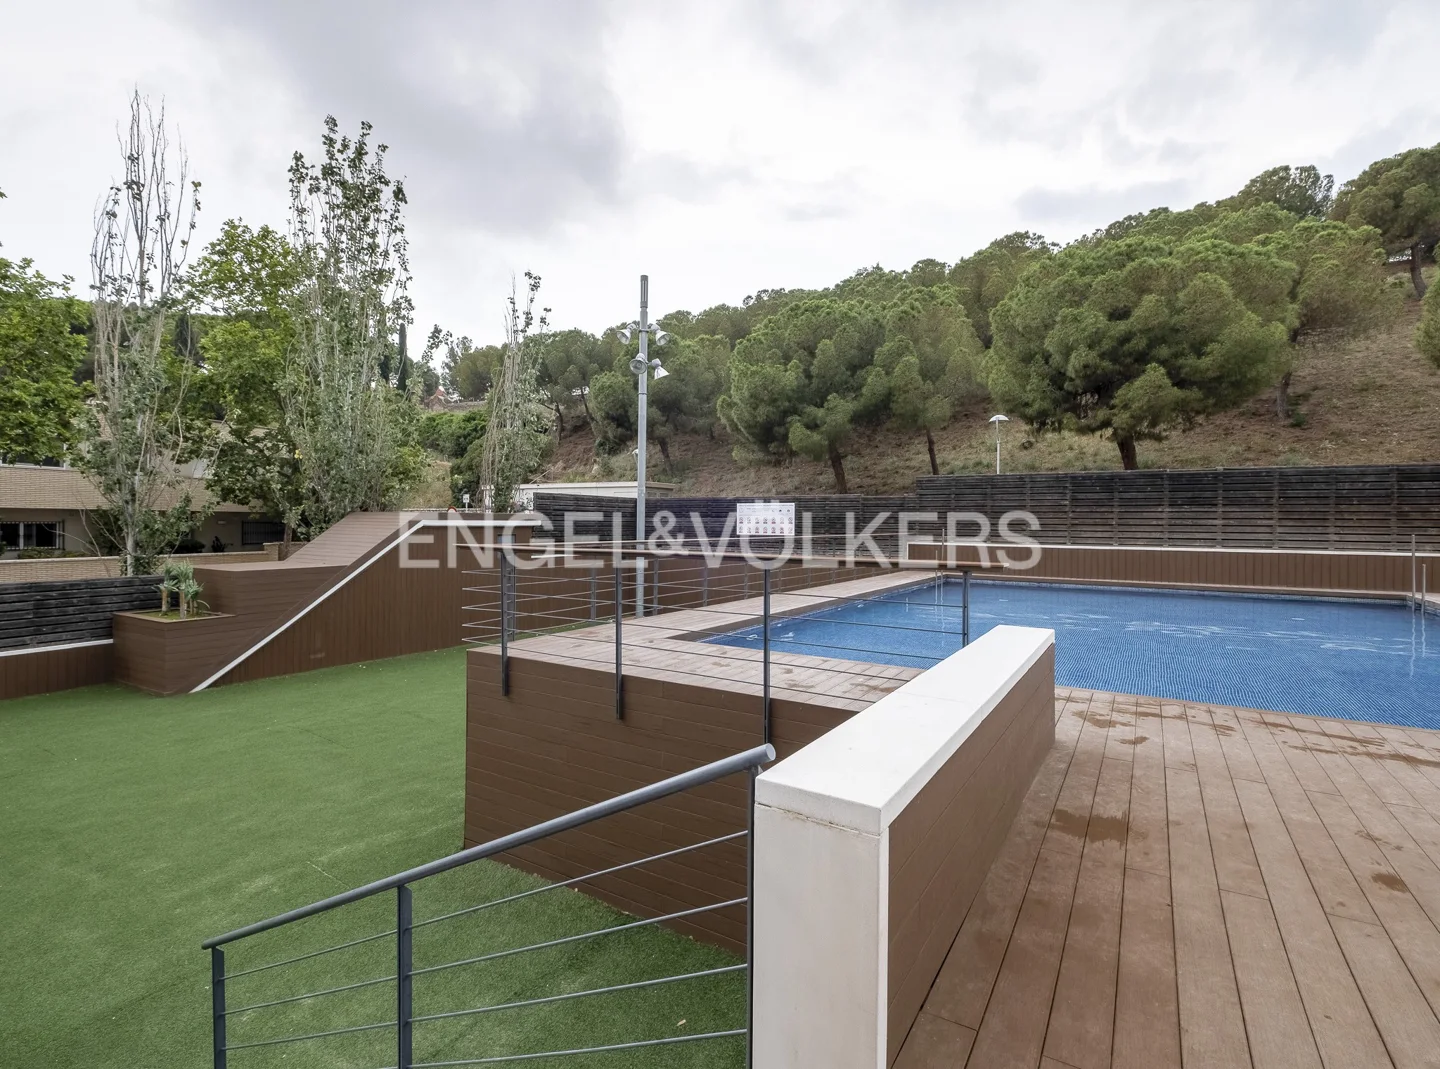 Apartment with swimming pool in Via Europa in Mataró.